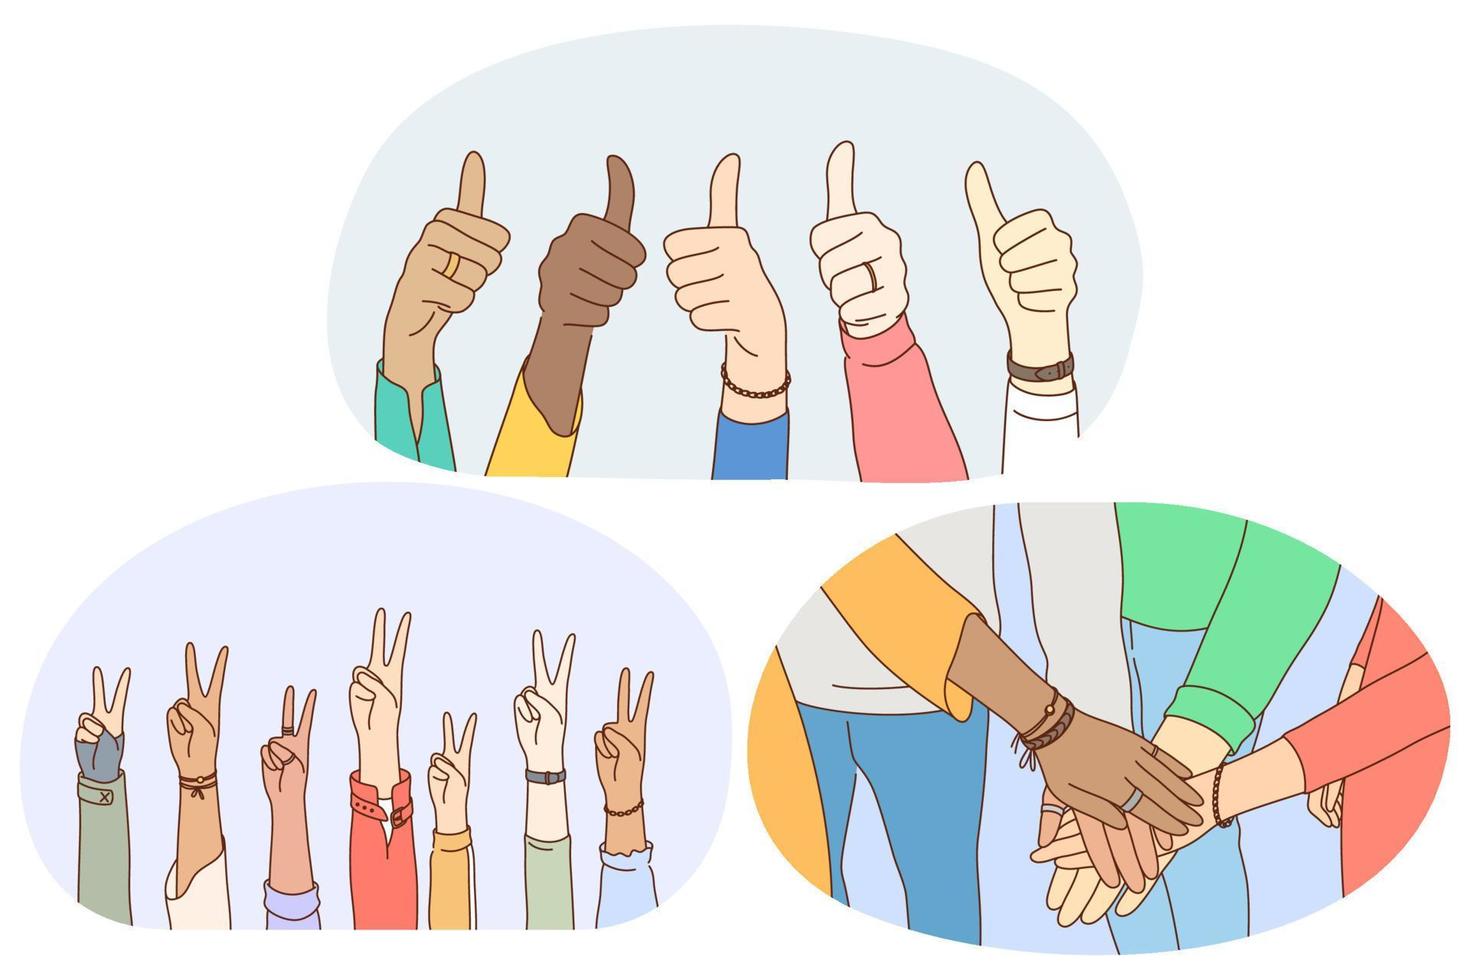 Sign and gesture language, hands emotion expression concept. Hands of mixed race people showing thumbs up sign, peace fingers sign and making heap of hands showing teamwork and mutual support vector